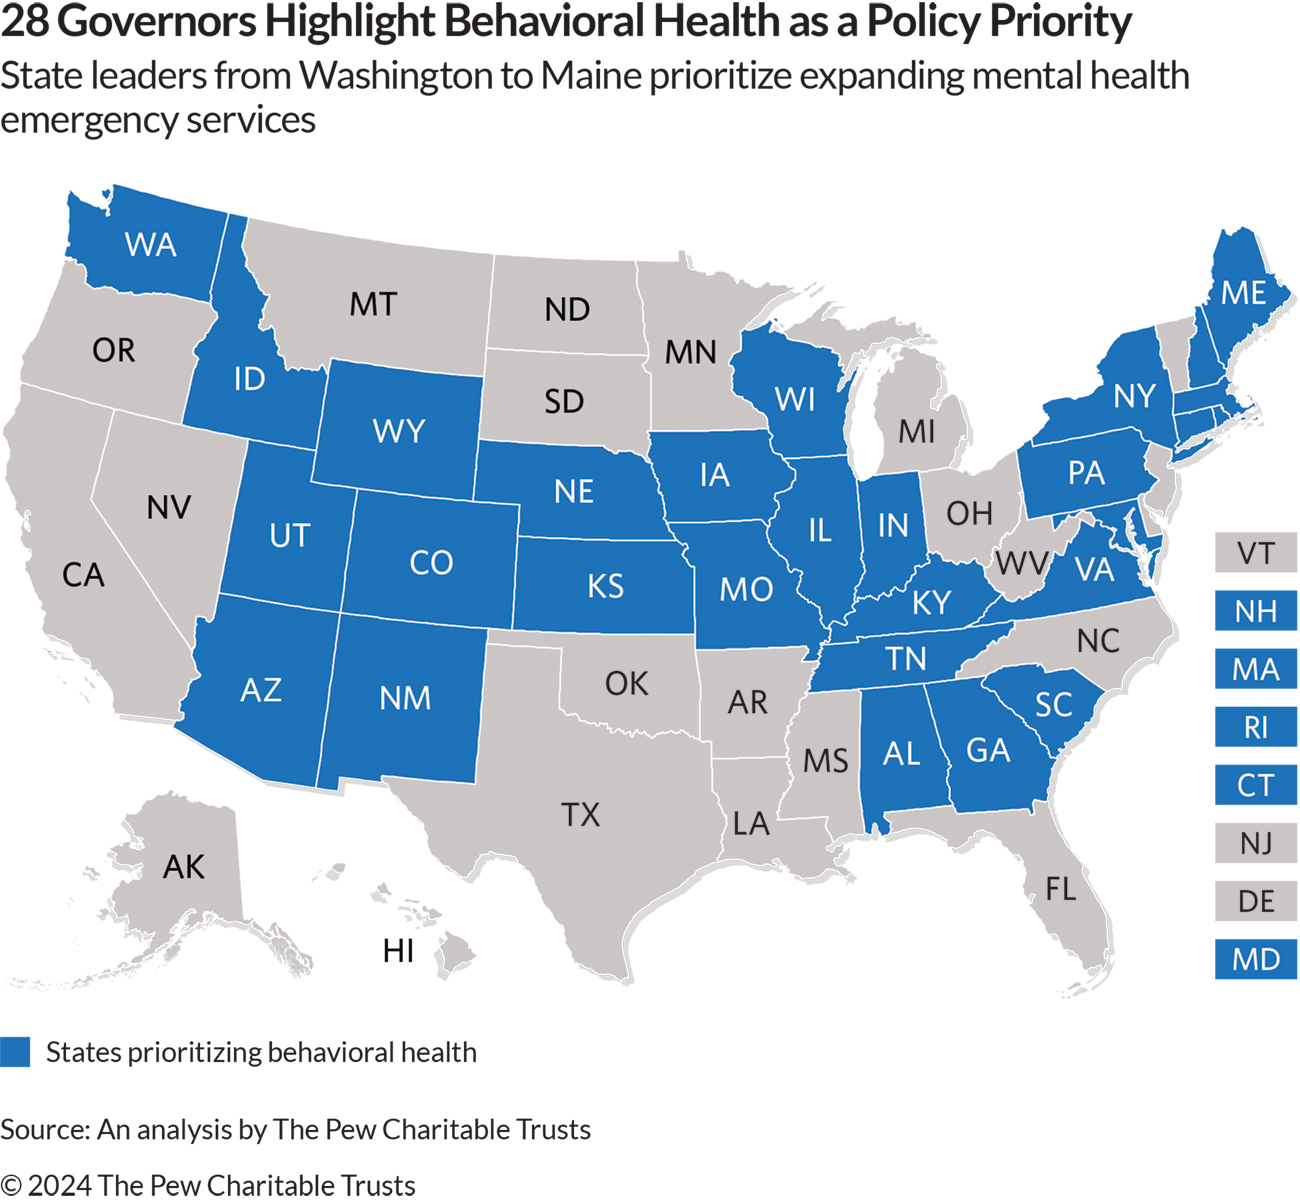 A U.S. map that highlights which states have governors who have committed to or mentioned mental health as a top policy priority for their administration for 2024. Those whose governors mentioned mental health in their State of the State addresses are shaded in blue, while the remainder are shaded in gray.